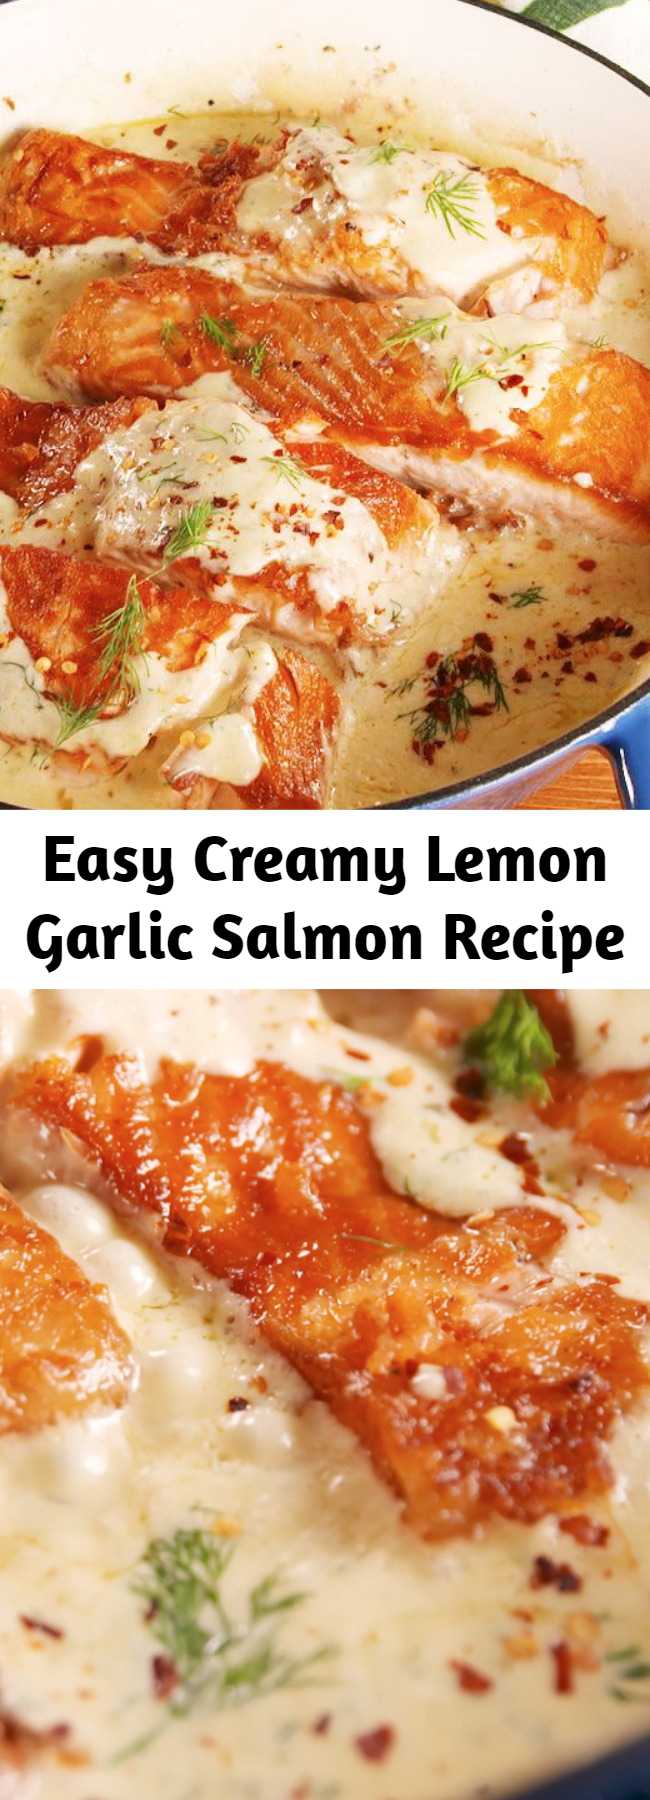 Easy Creamy Lemon Garlic Salmon Recipe - Dill's bright flavor is perfect for this creamy sauce. But if you're not a big fan, we recommend using something like thyme instead! Chives or parsley could also work, but their presence wouldn't be as bold. be as assertive. #dinnerrecipes #dinnerideas #seafood #salmonrecipes #salmon #datenight #datenightdinner #dinner #glutenfreerecipes #glutenfree